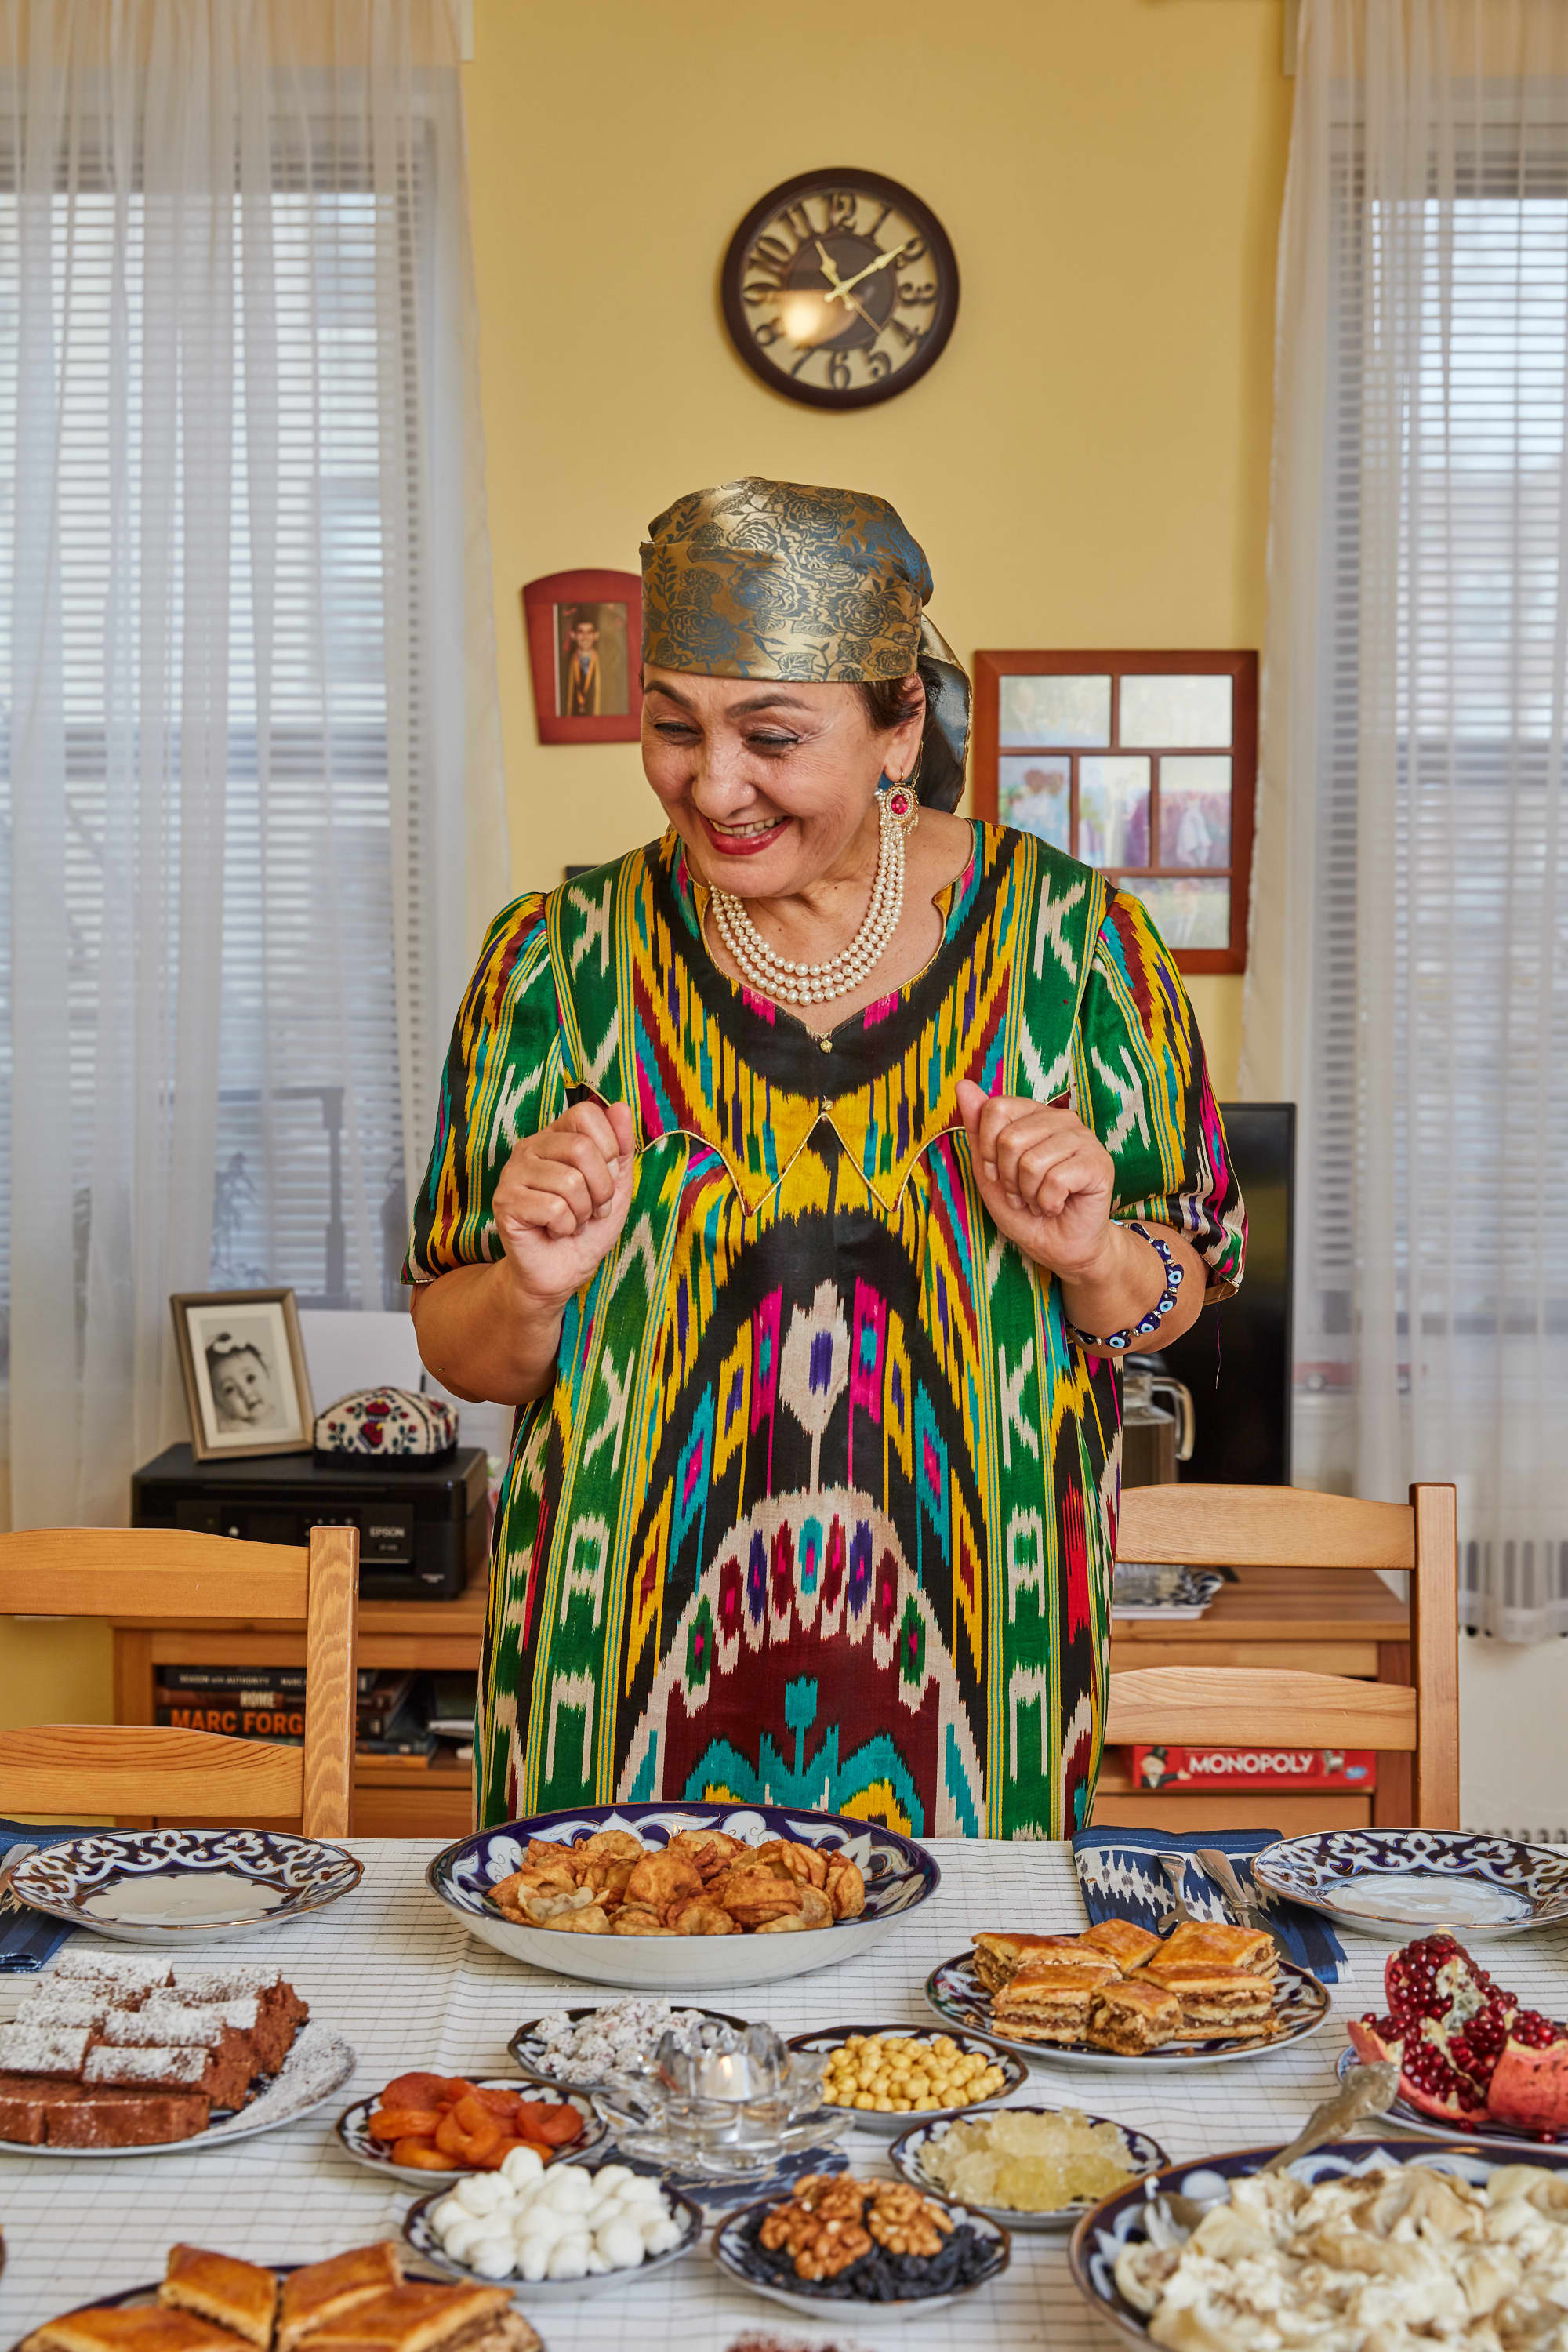 Uzbek Cooking Traditions | The Kitchn